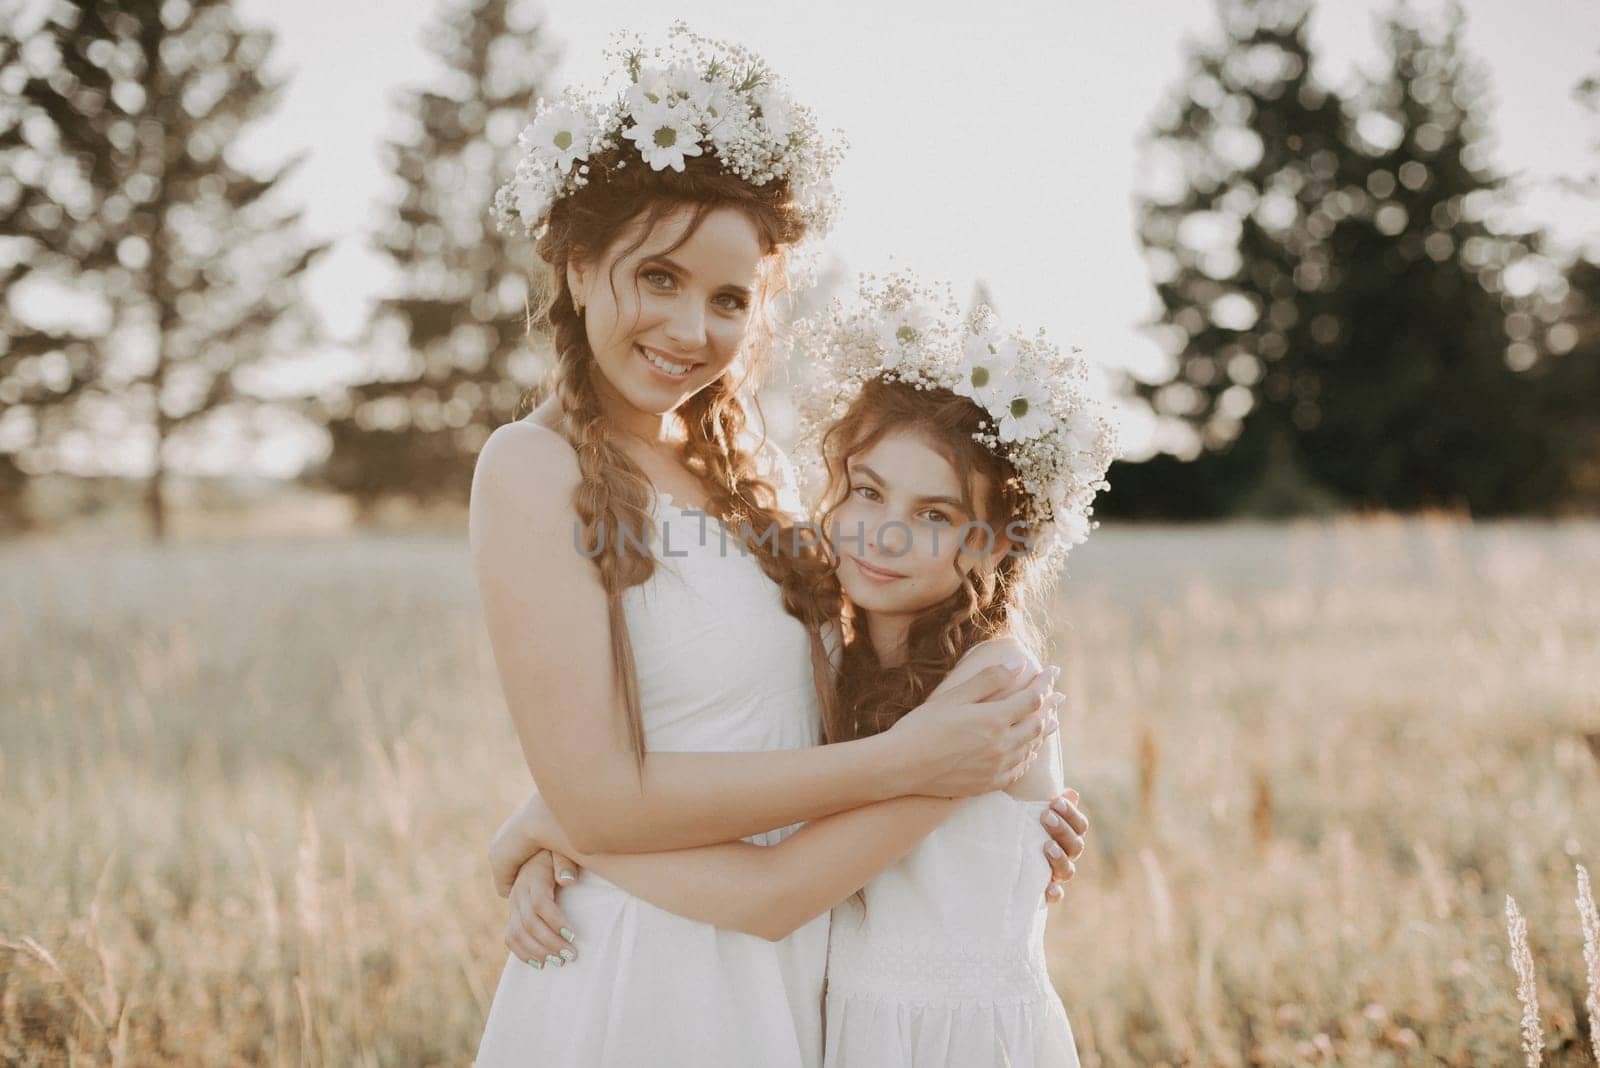 happy sisters in white dresses with floral wreaths and boho style braids in summer in a field in nature. Added a small grain simulation of film photography